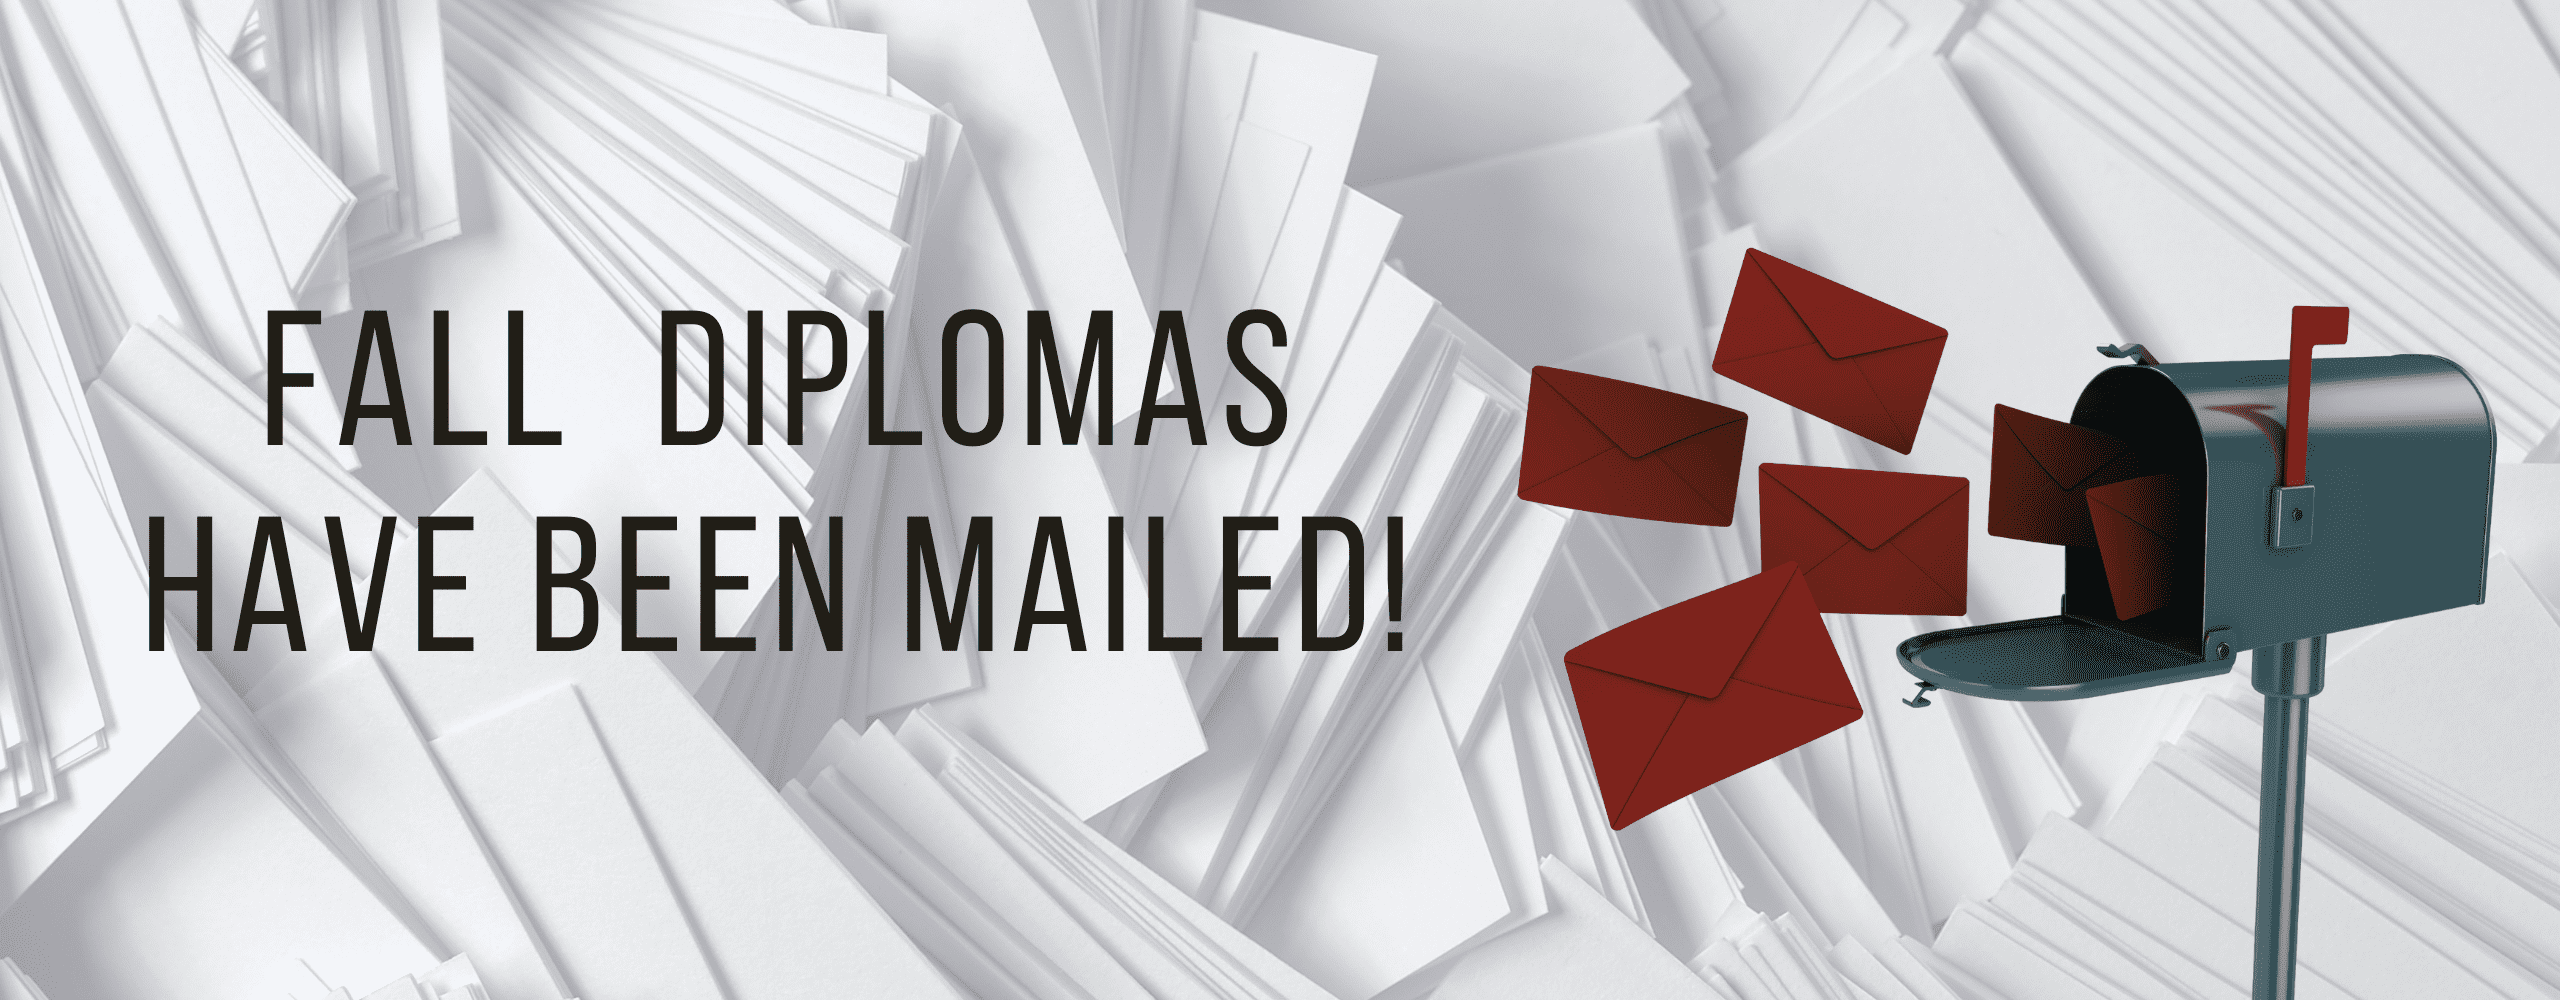 Fall diplomas have been mailed!